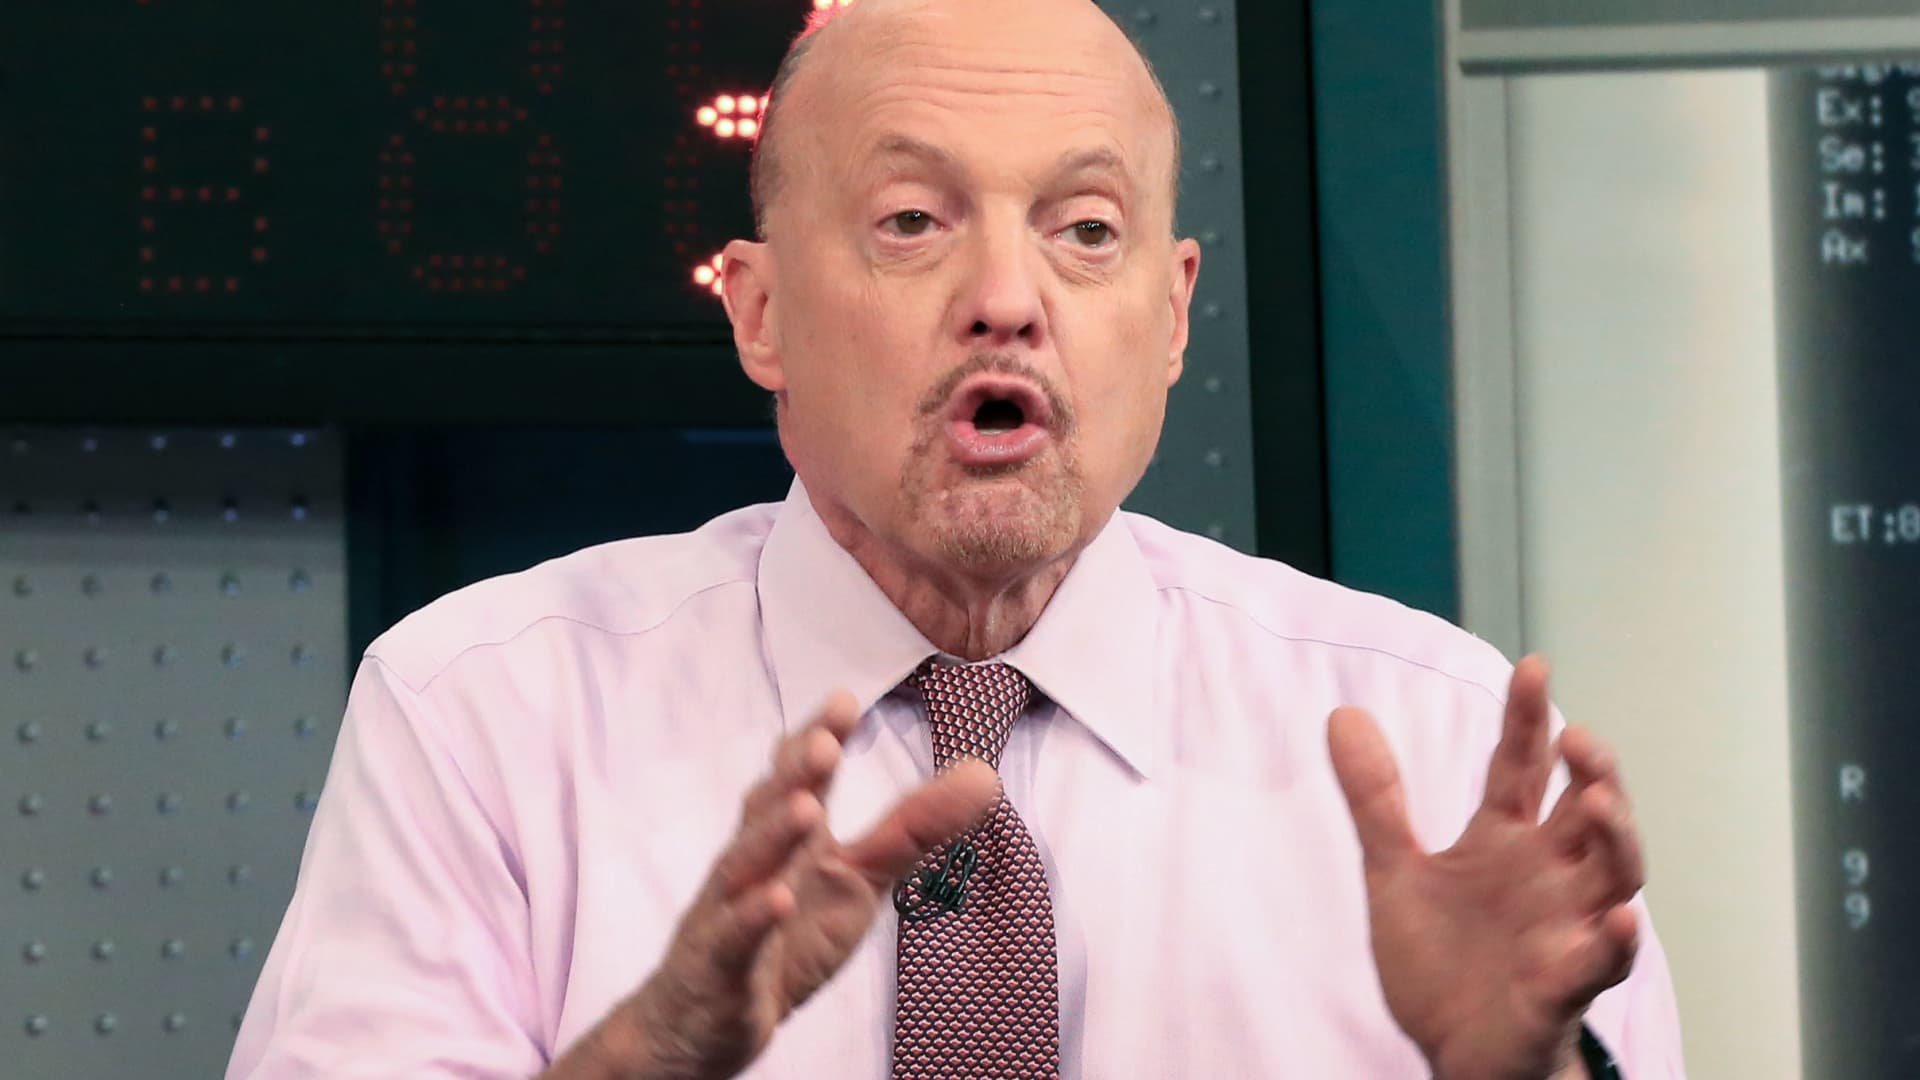 Jim Cramer says Wednesday’s market rally was ‘based on a dream’